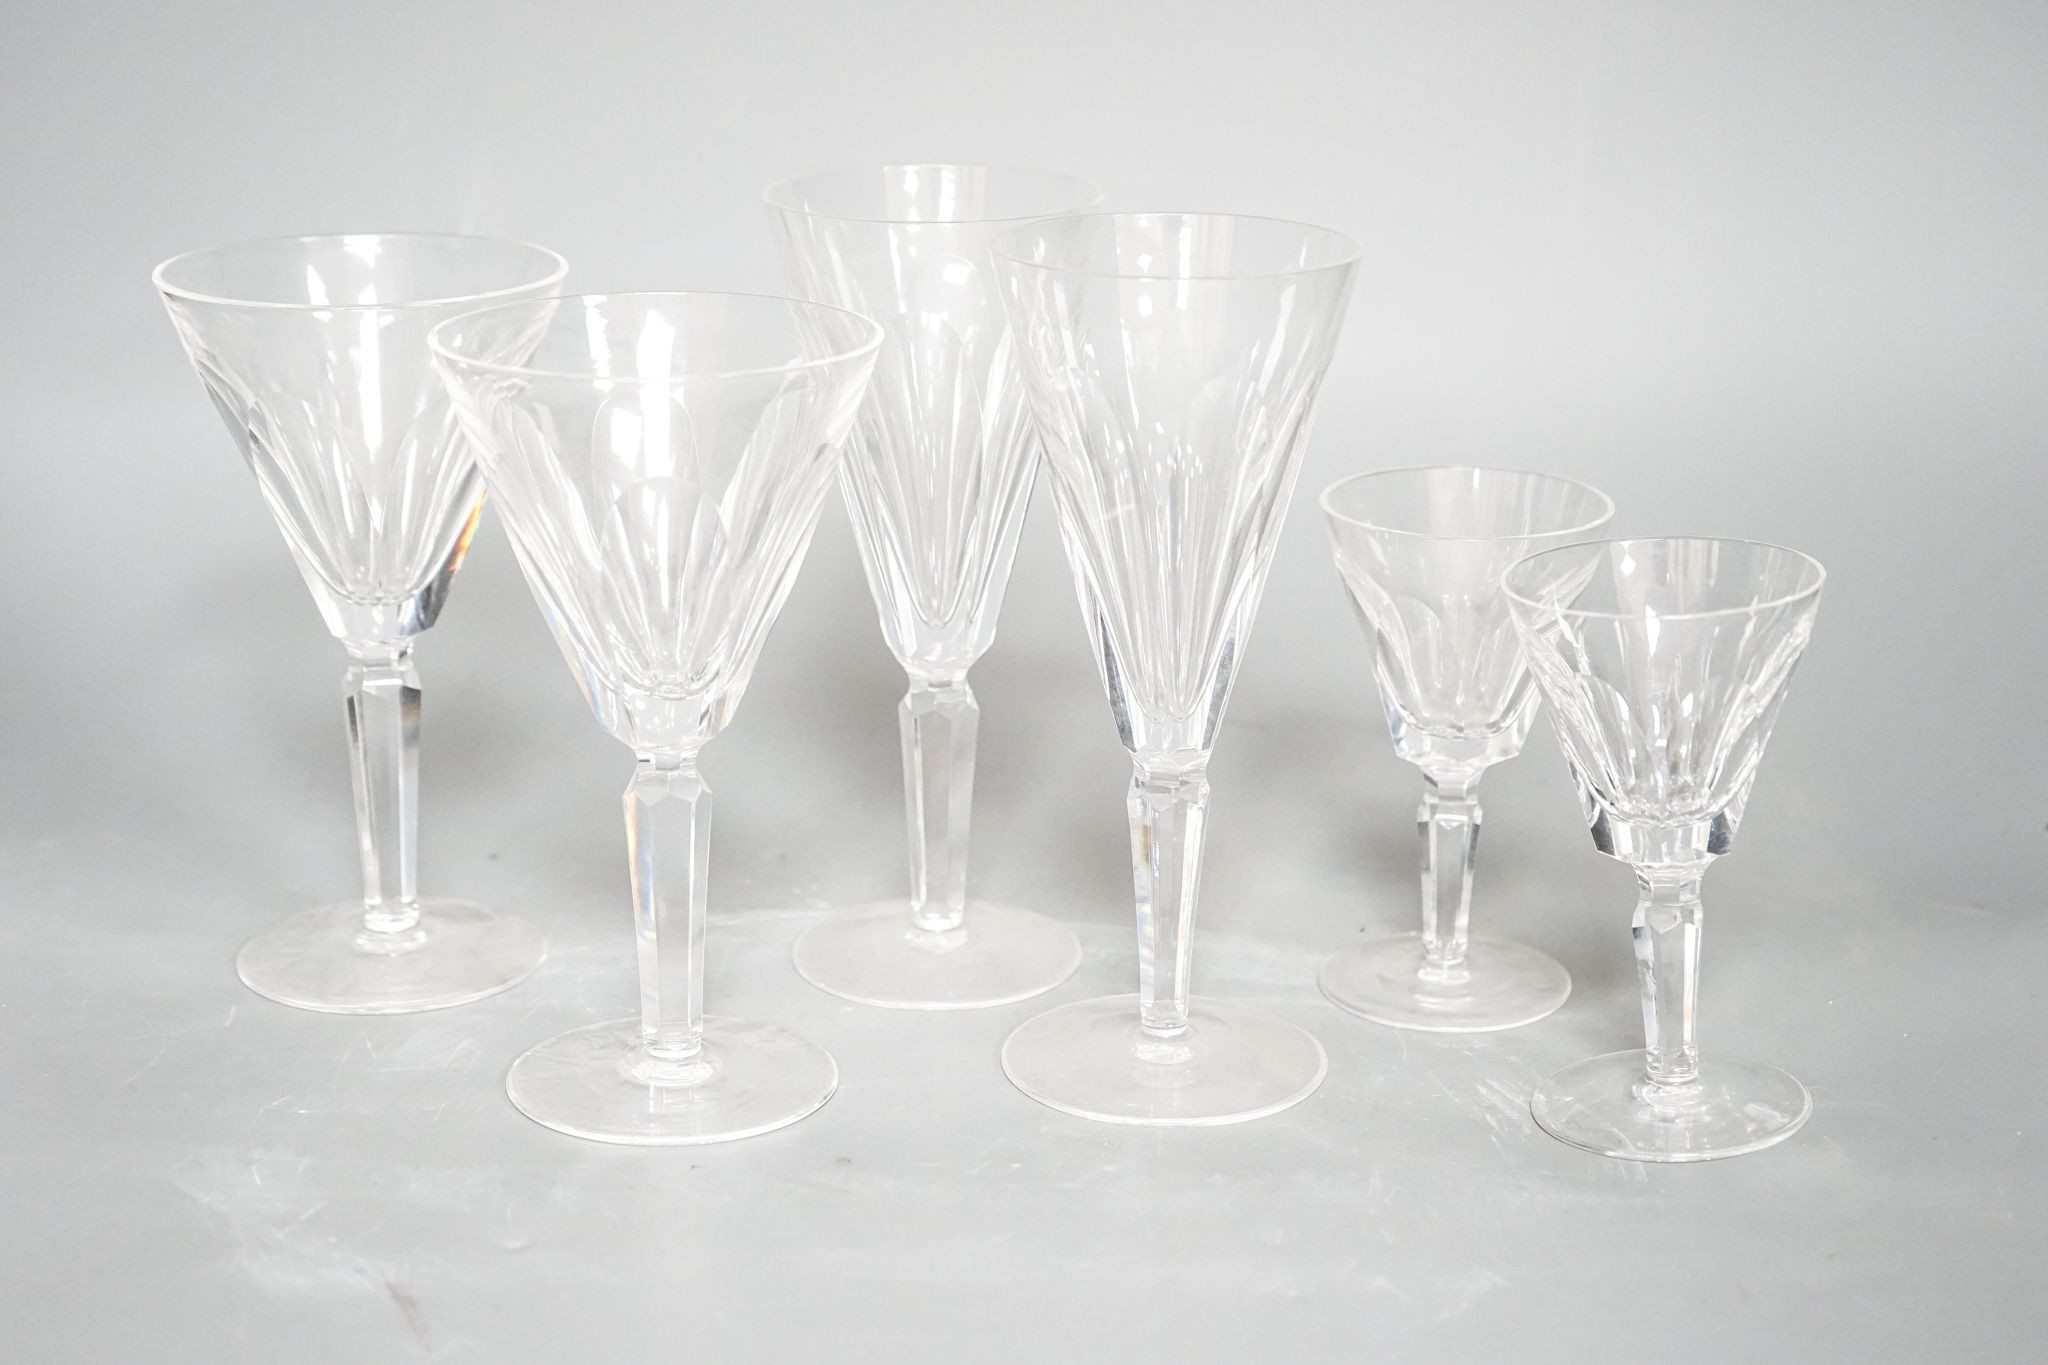 Waterford 'Sheila' pattern drinking glasses